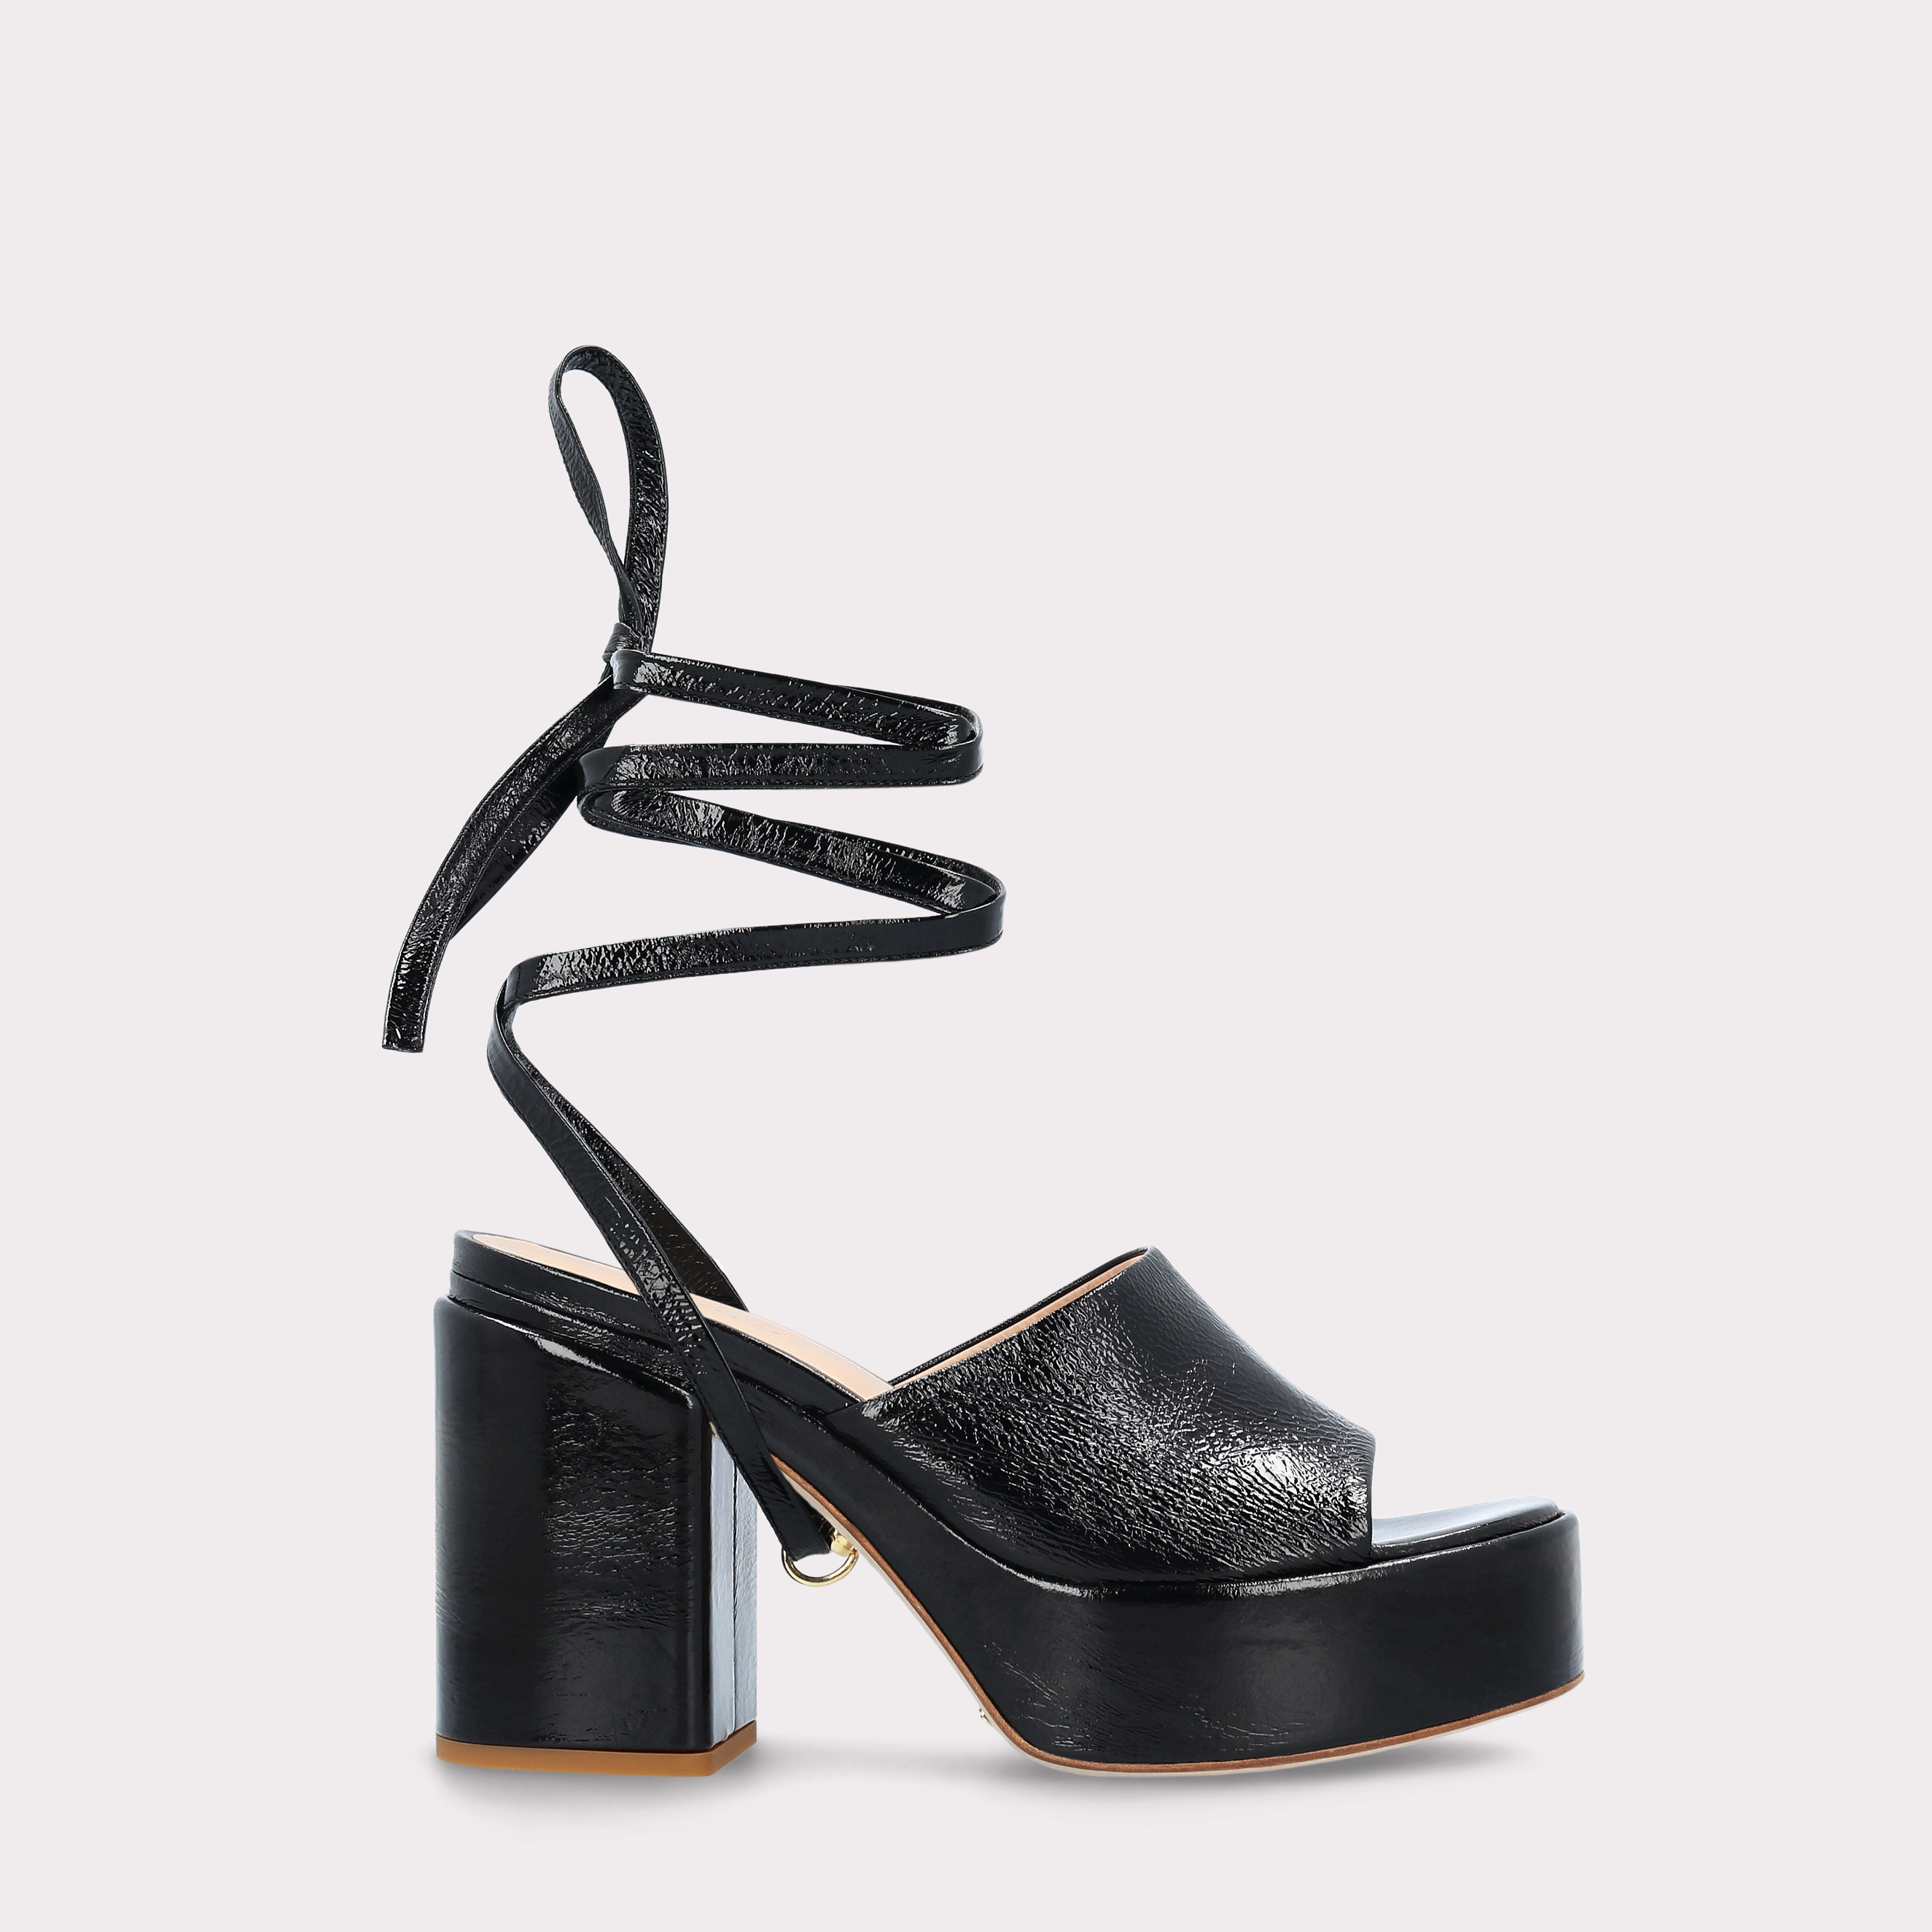 AKAADA 02 BLACK CRUSHED PATENT LEATHER SANDALS